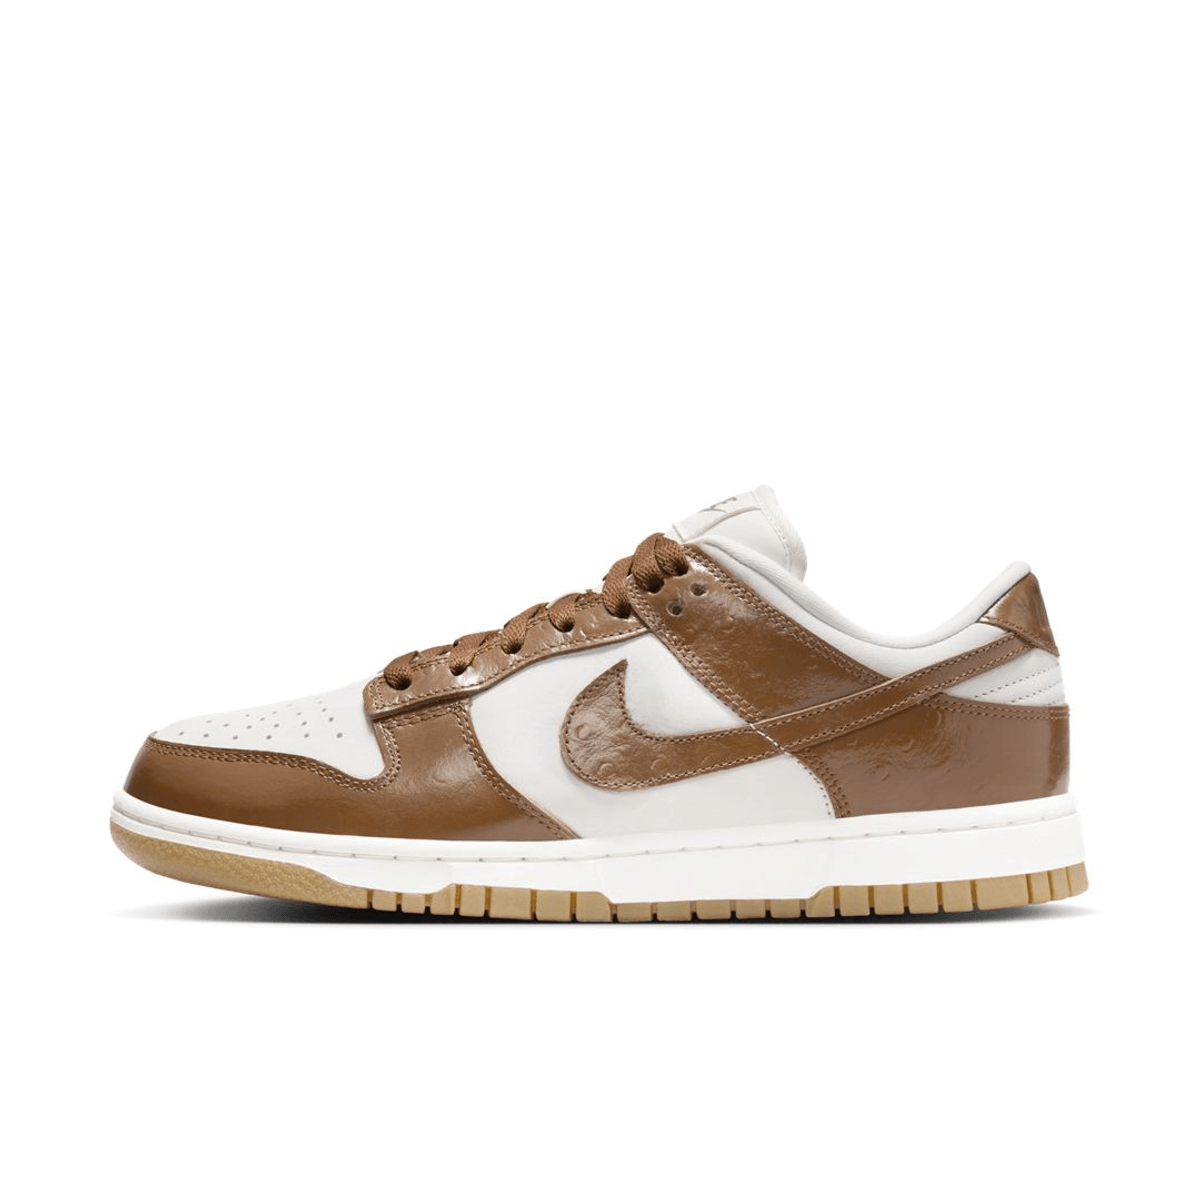 Official Images Of The Nike Dunk Low LX “Brown Ostrich”